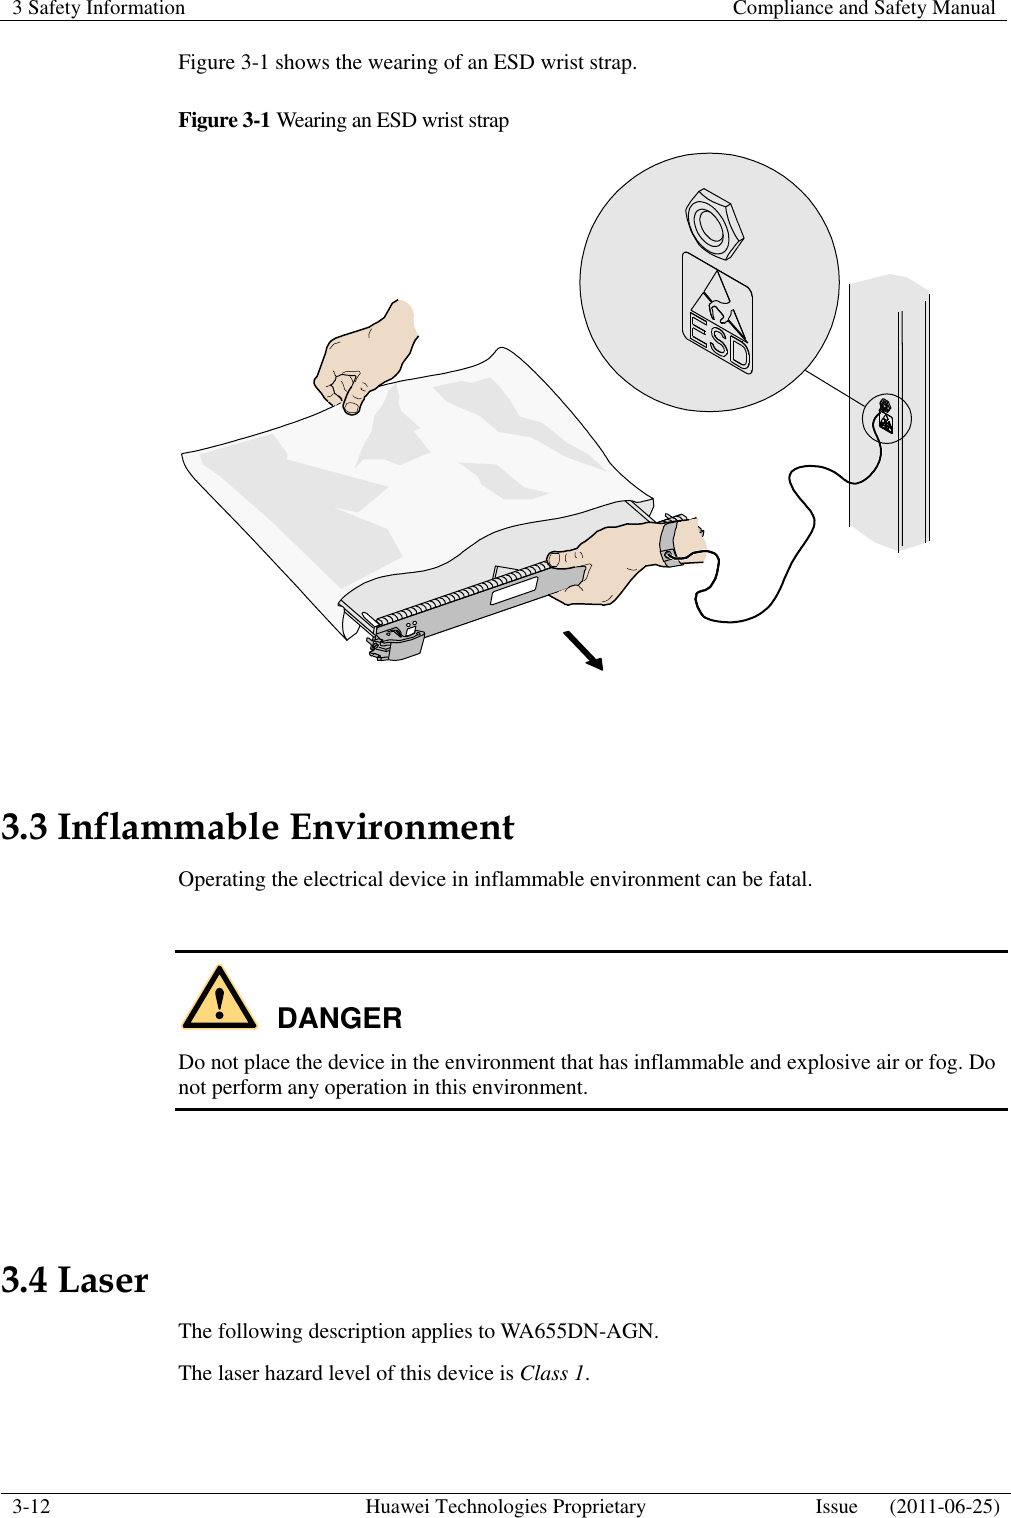 3 Safety Information    Compliance and Safety Manual  3-12 Huawei Technologies Proprietary Issue      (2011-06-25)  Figure 3-1 shows the wearing of an ESD wrist strap. Figure 3-1 Wearing an ESD wrist strap   3.3 Inflammable Environment Operating the electrical device in inflammable environment can be fatal.  DANGER Do not place the device in the environment that has inflammable and explosive air or fog. Do not perform any operation in this environment.   3.4 Laser The following description applies to WA655DN-AGN. The laser hazard level of this device is Class 1.  